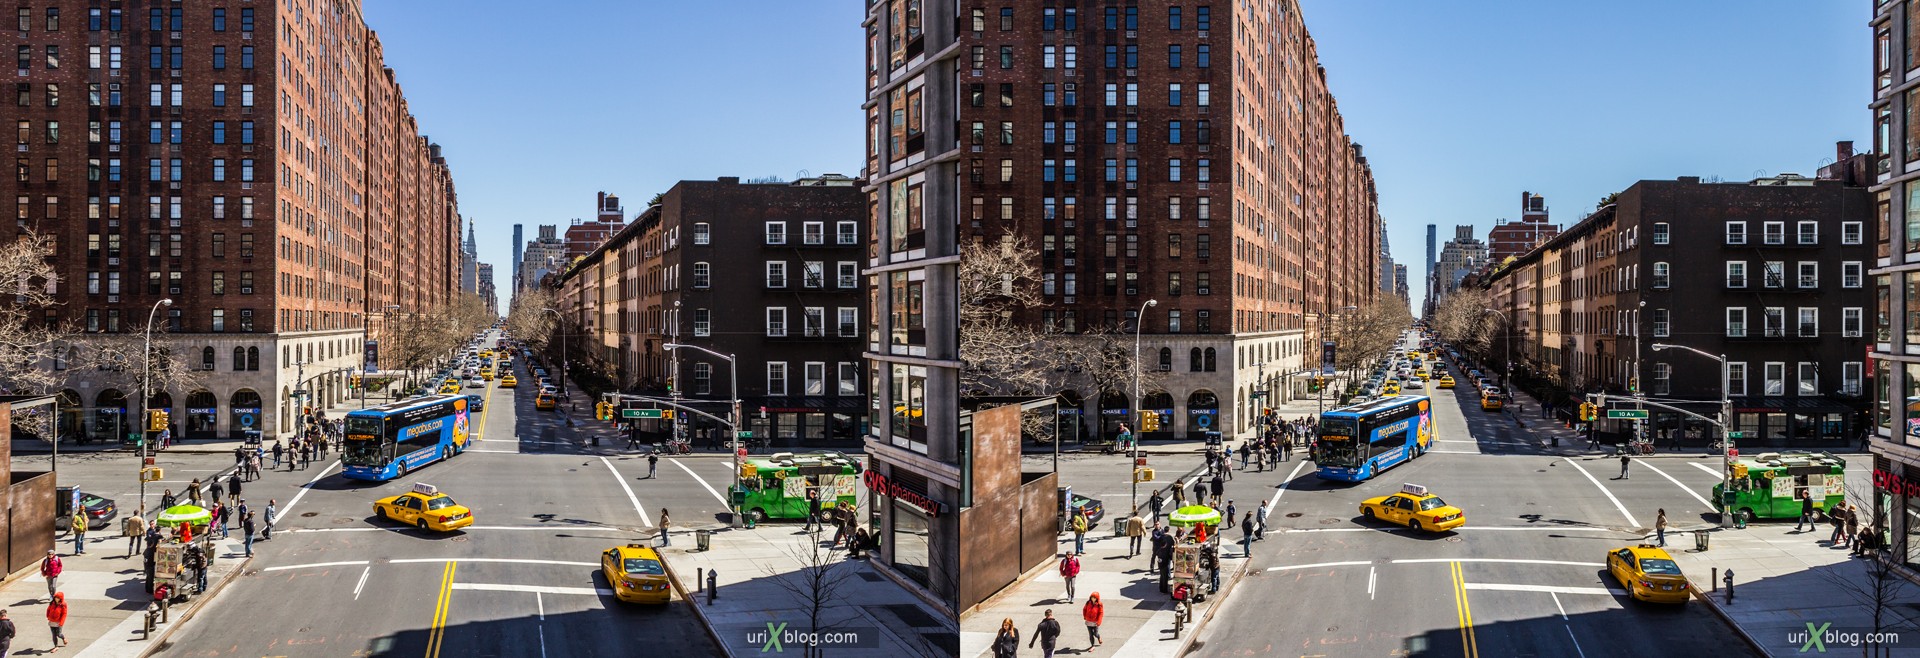 2013, NYC, New York, Manhattan, W 23rd Street, High Line, view from the top, city, building, skyscraper, panorama, 3D, stereo pair, cross-eyed, crossview, cross view stereo pair, stereoscopic